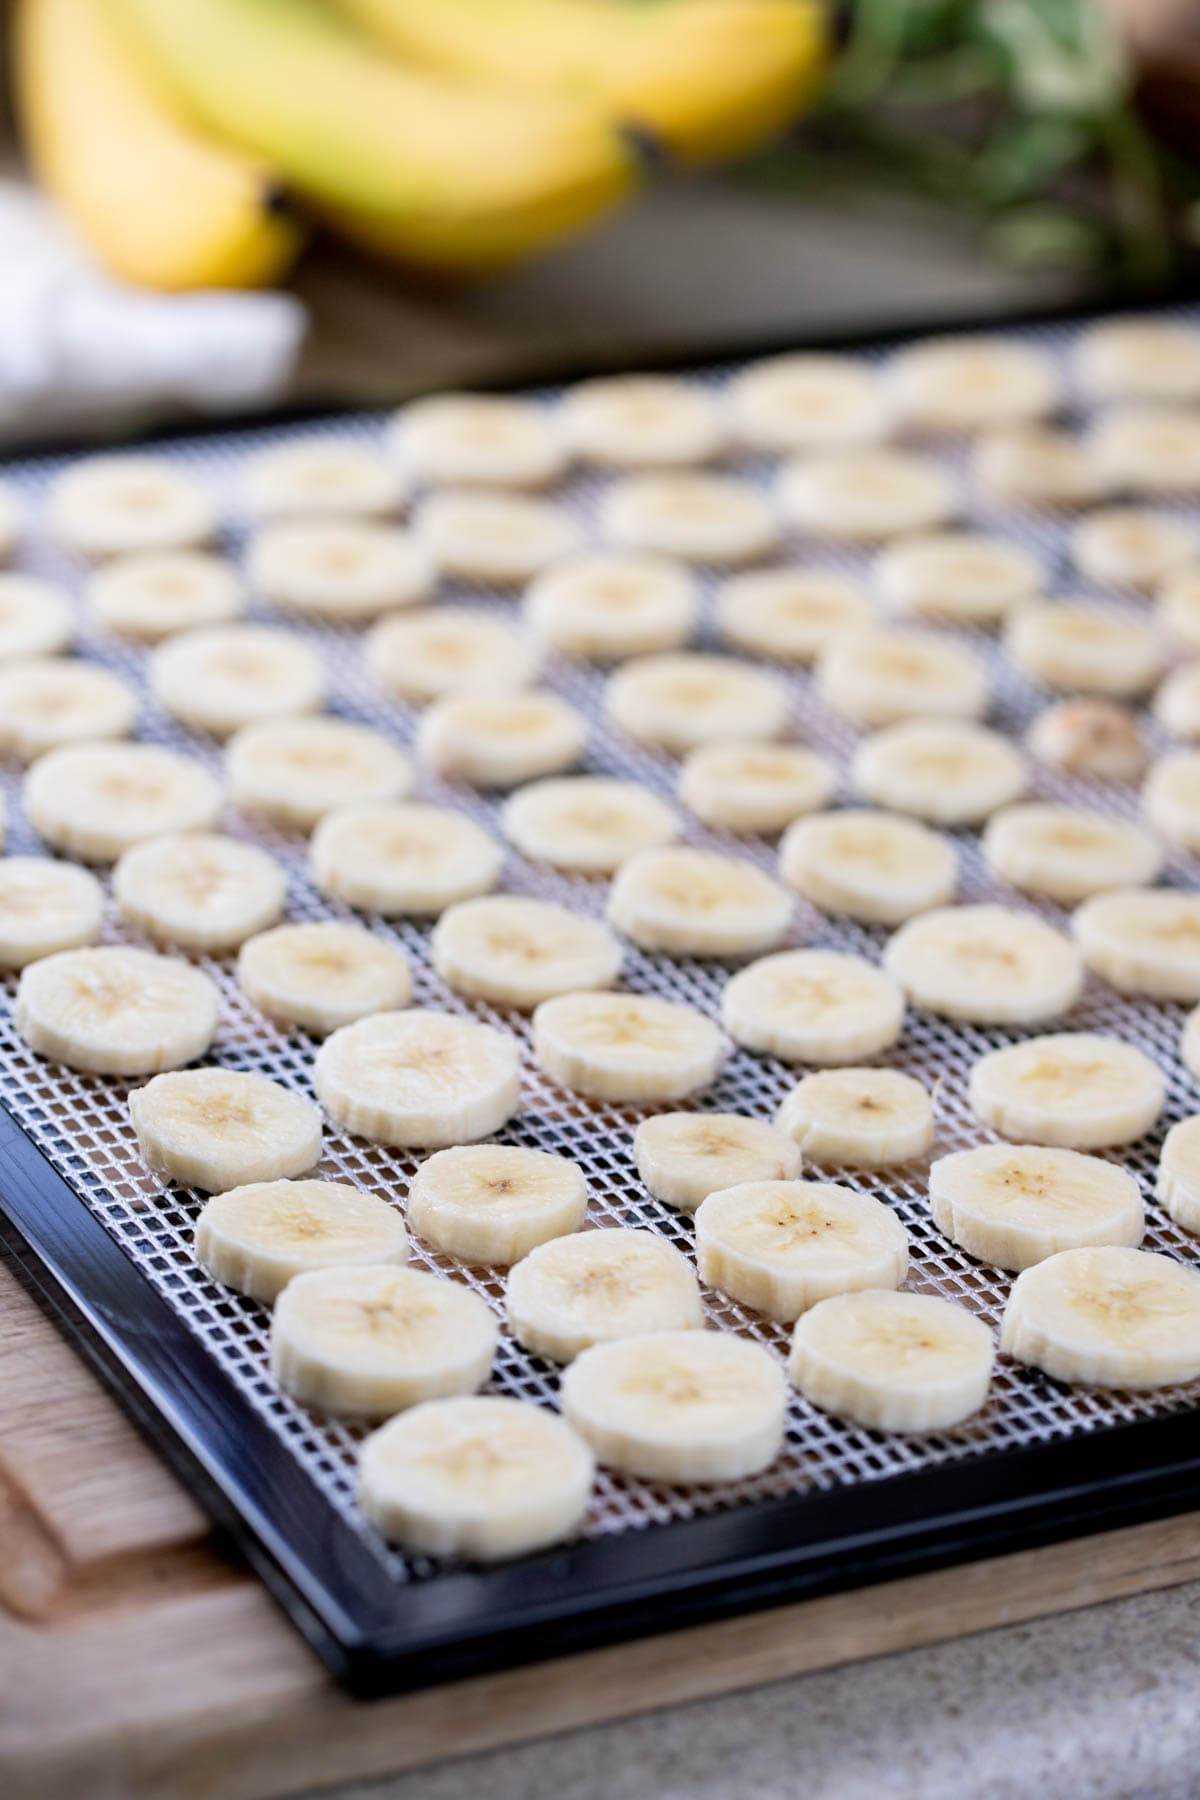 setting banana slices in one layer on the tray of the dehydrator